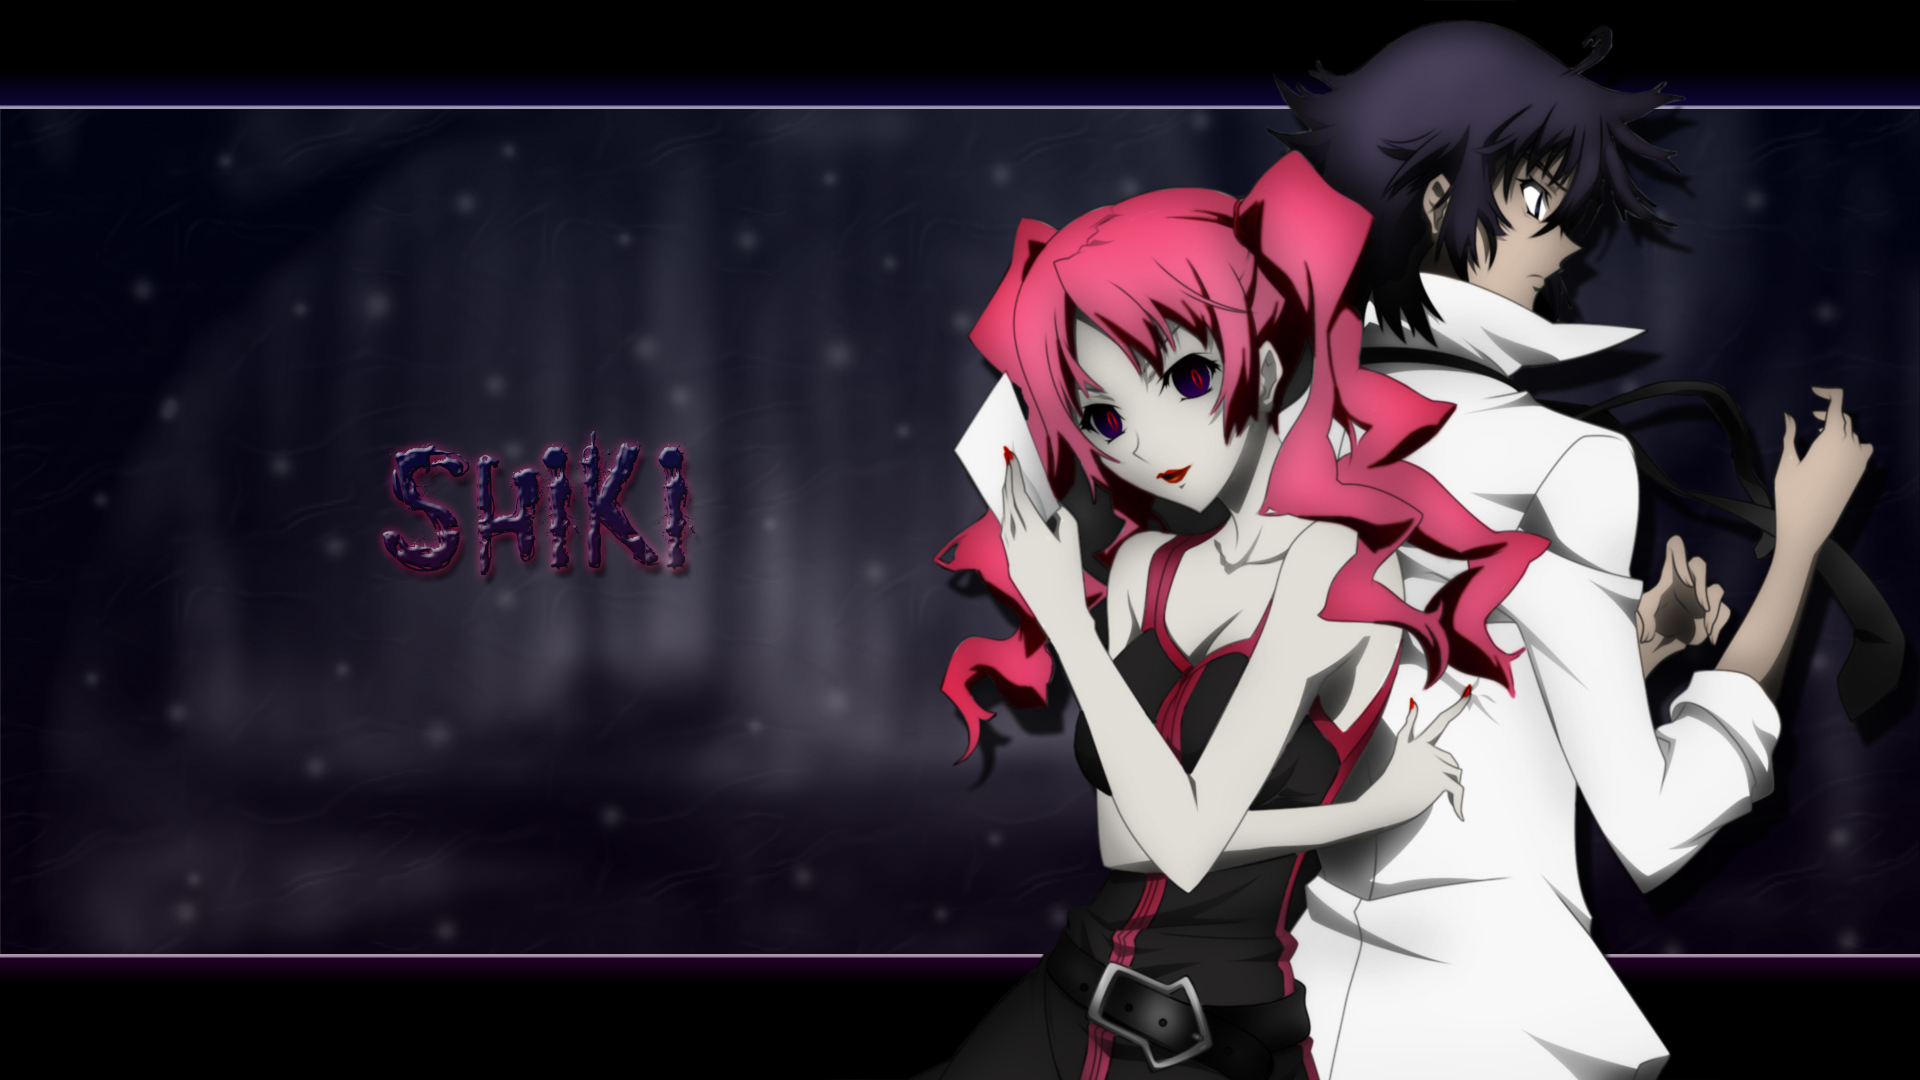 17+ images about Shiki on Pinterest | Sons, Search and Vampires